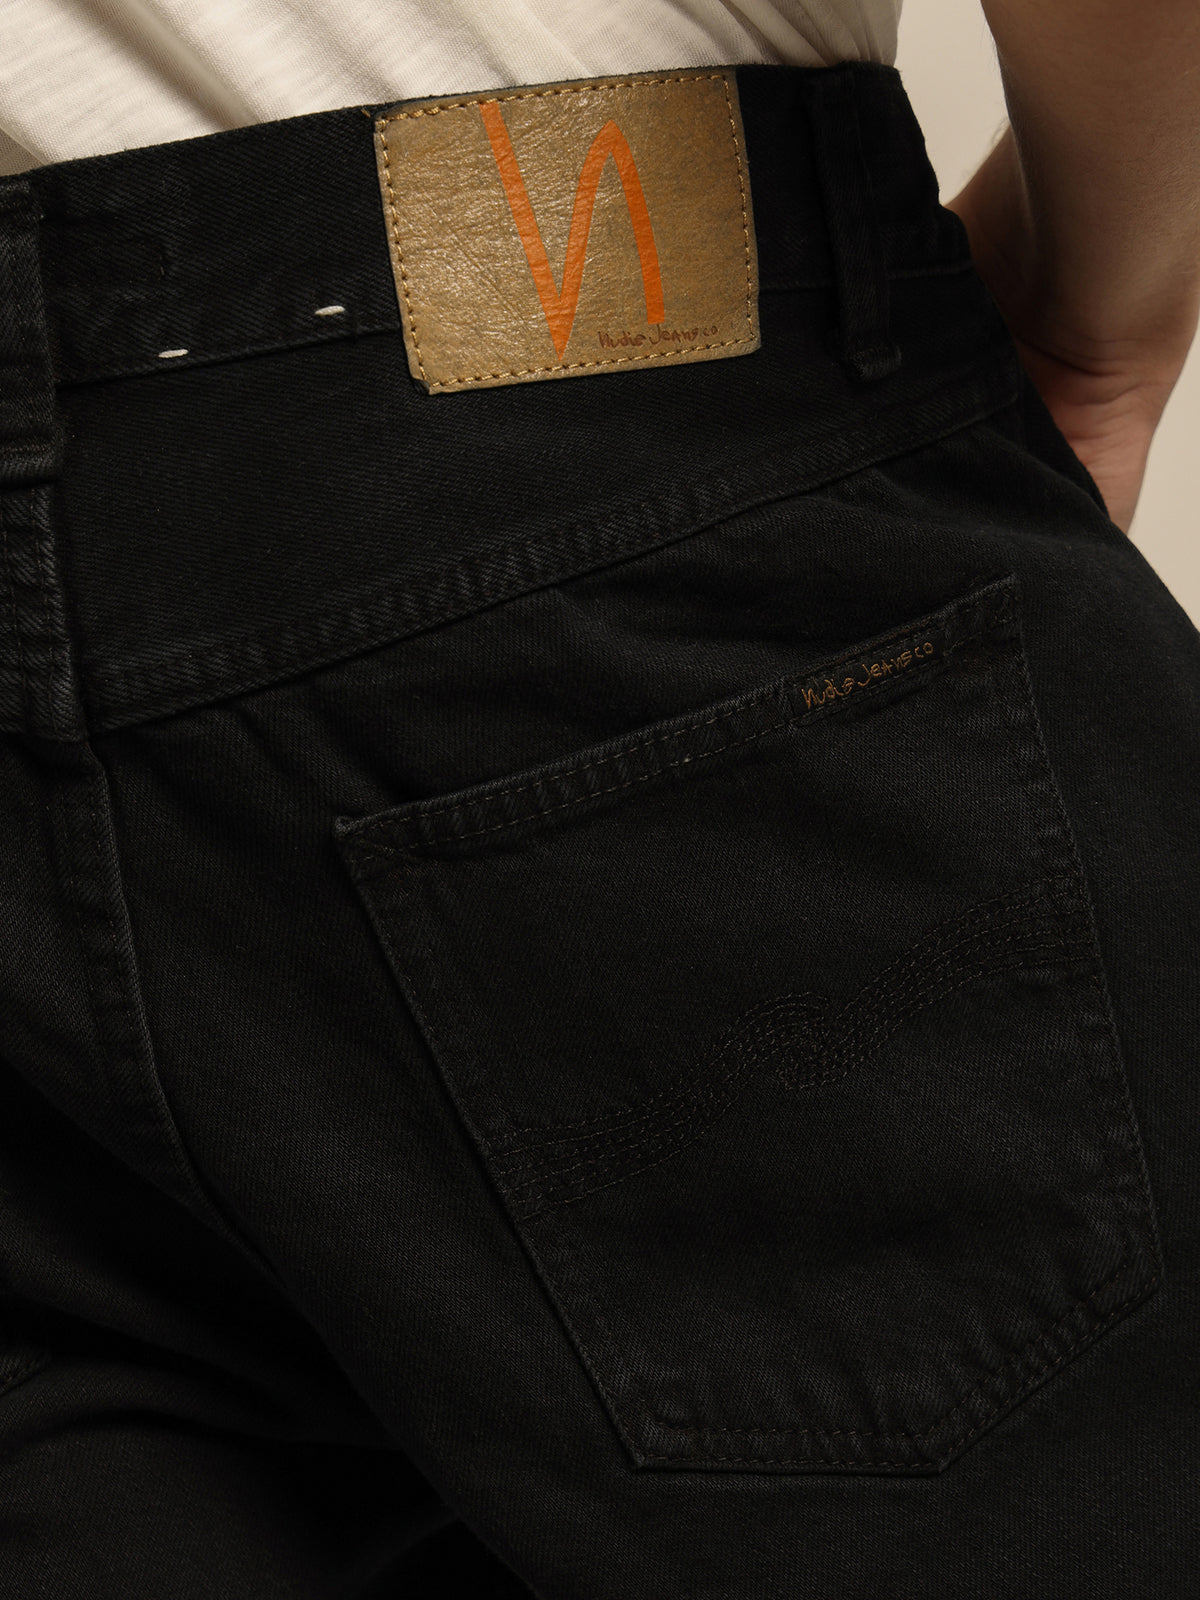 Gritty Jackson Jeans in Black